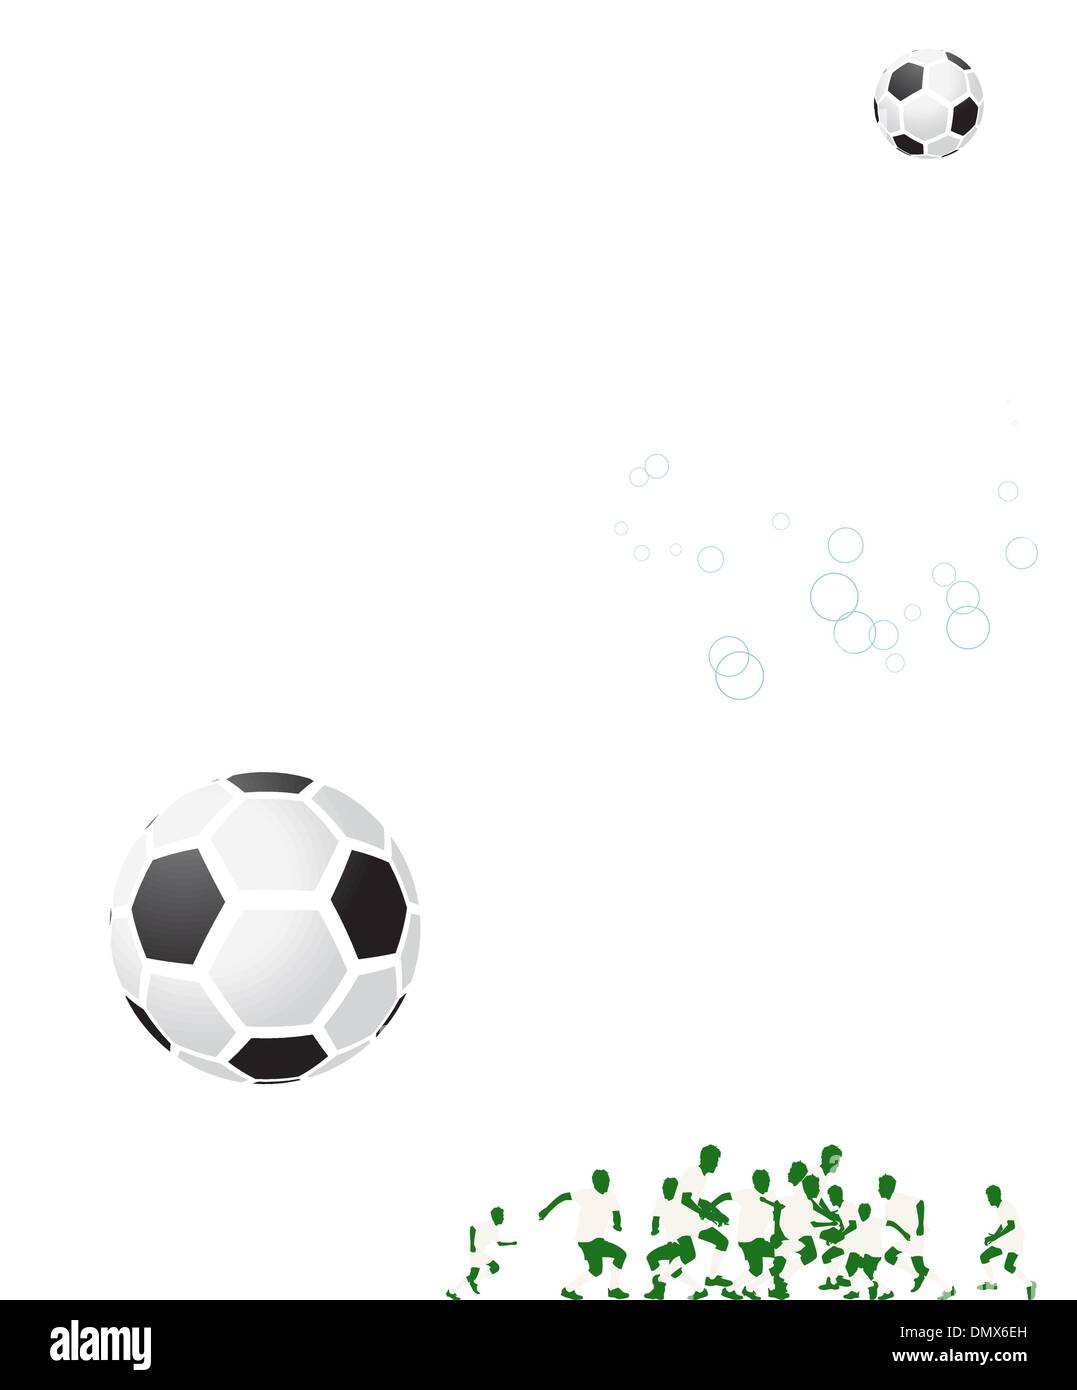 Football background for your design. Players on field, soccer ball Stock Vector